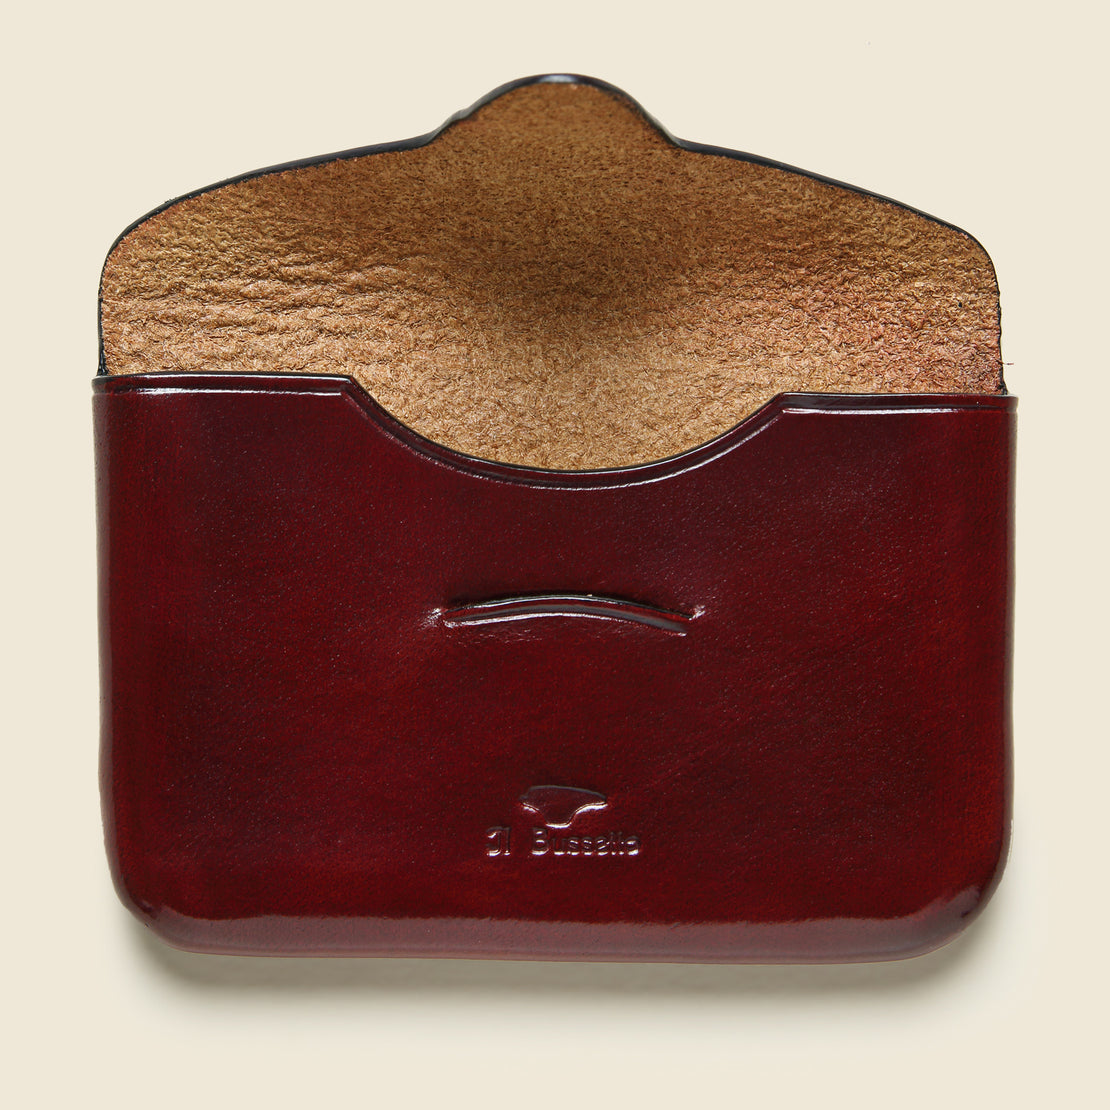 Business Card Holder - Cherry - Il Bussetto - STAG Provisions - Accessories - Wallets